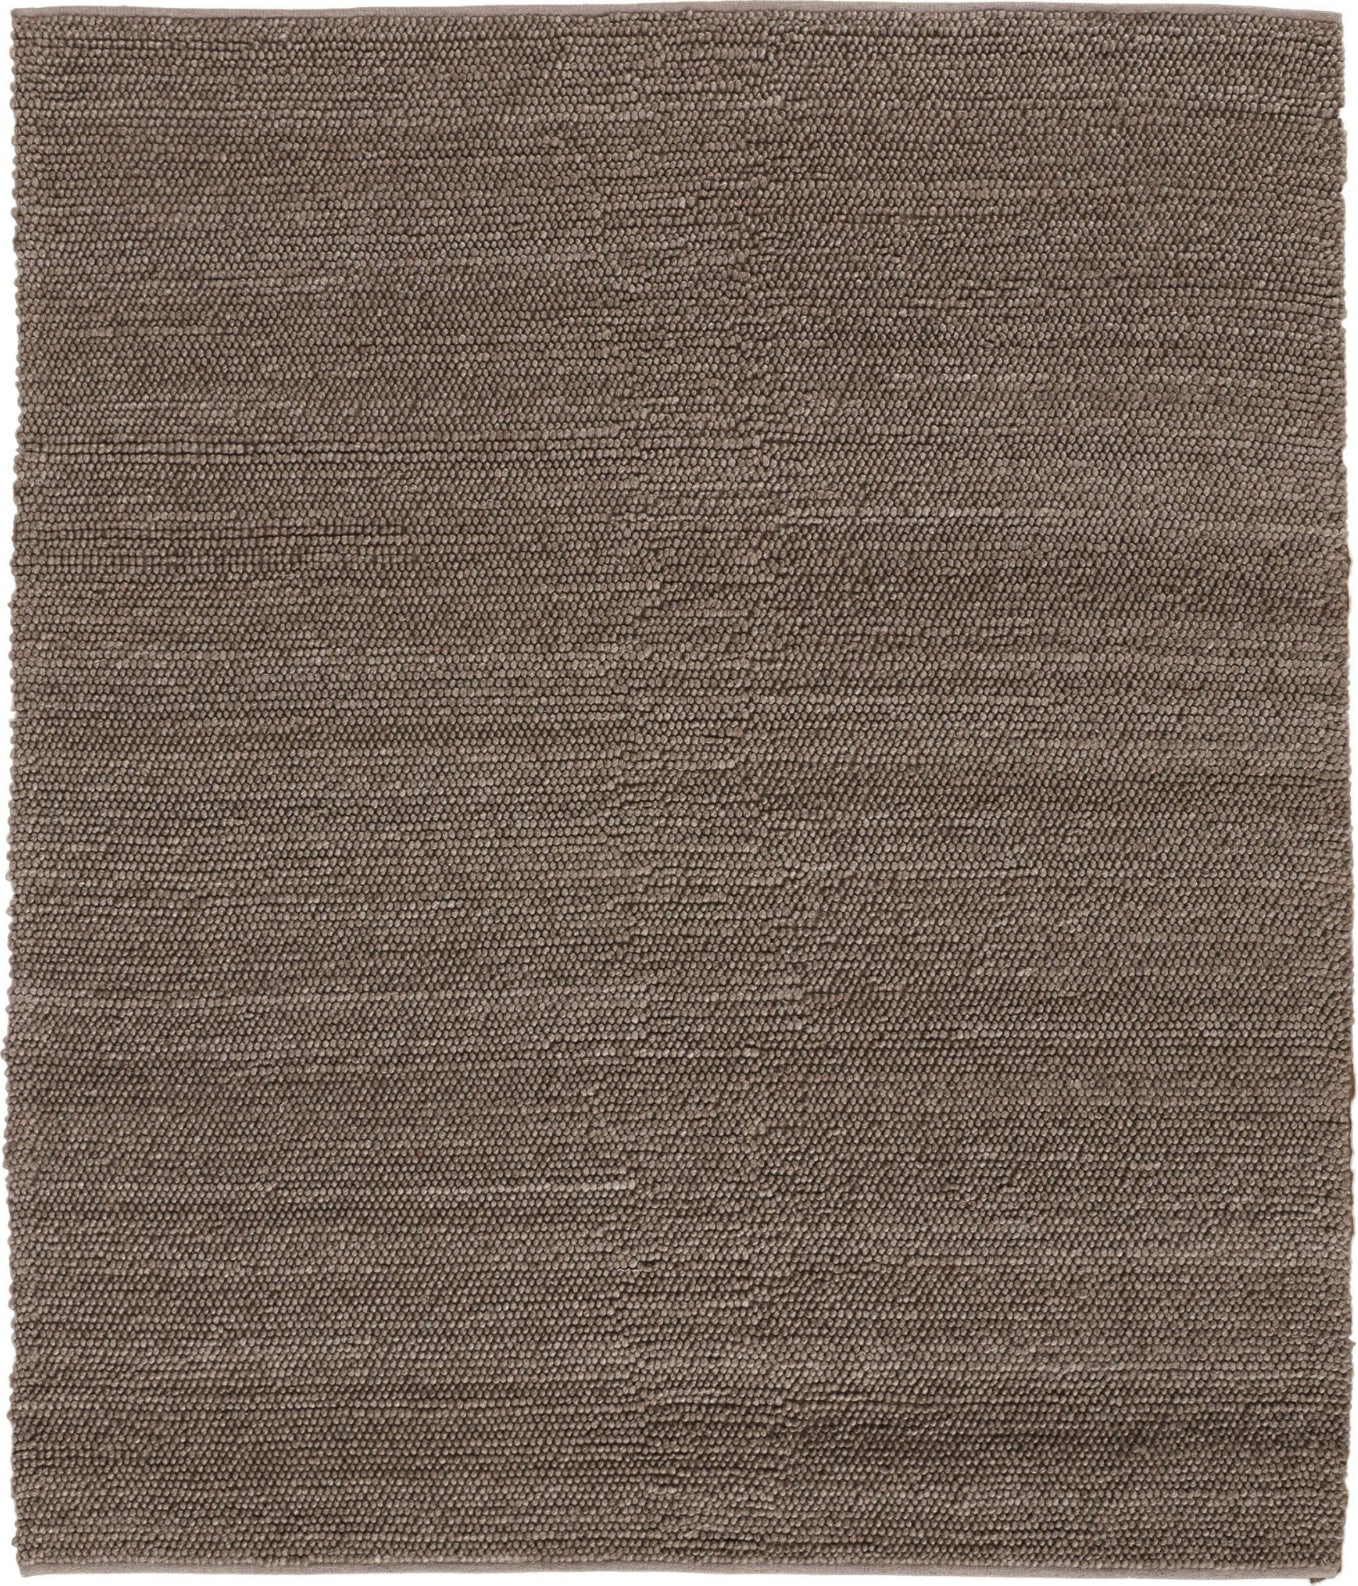 Feizy Thayer 8649F Brown Area Rug by Thom Filicia